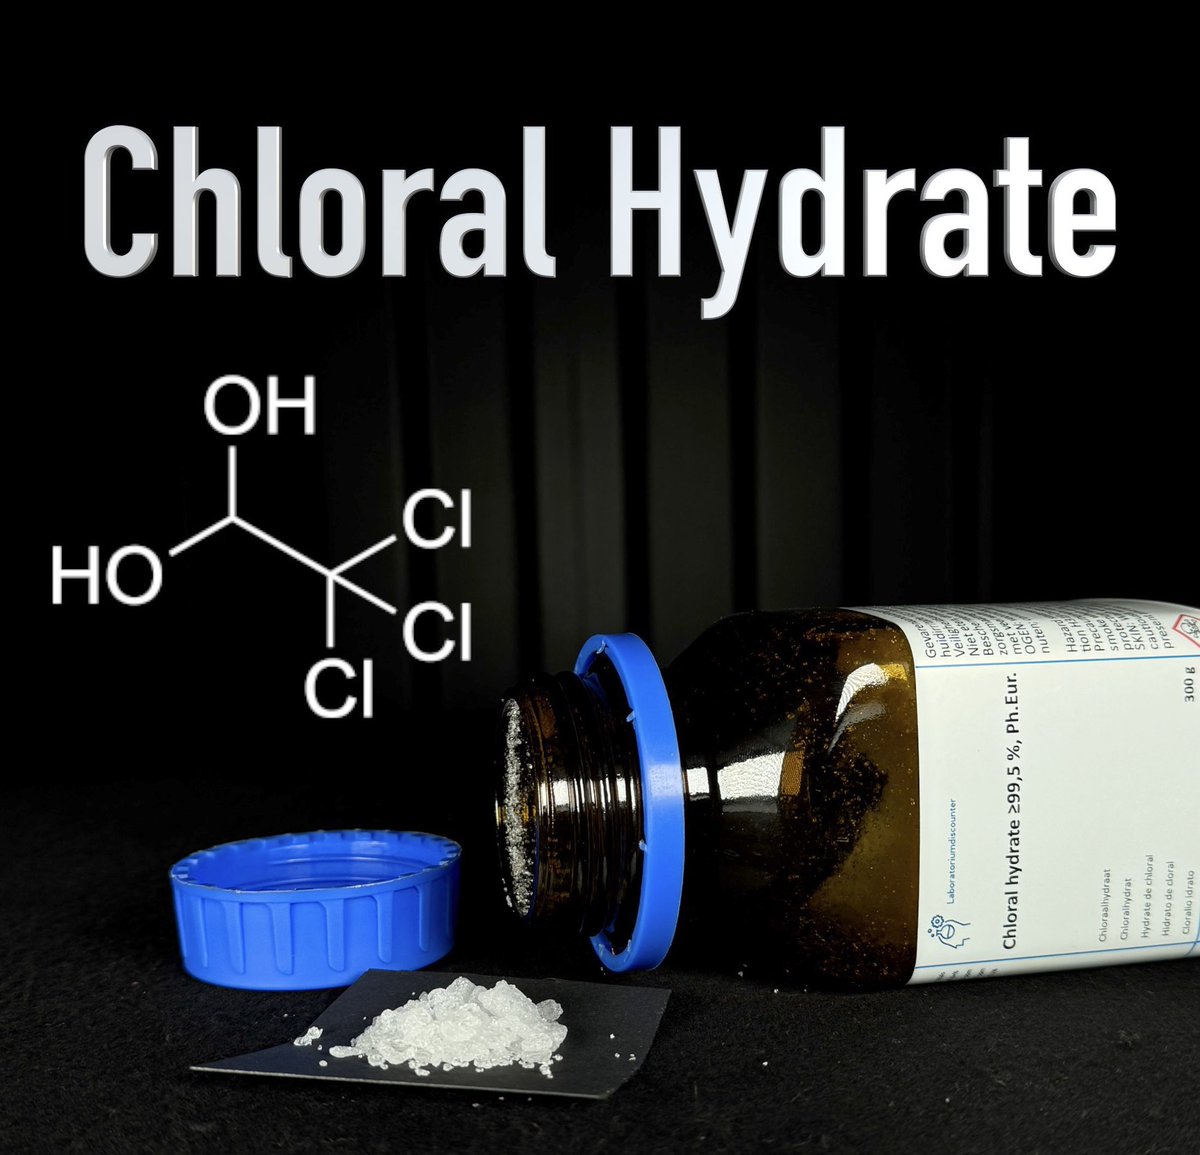 Chloral hydrate chempost